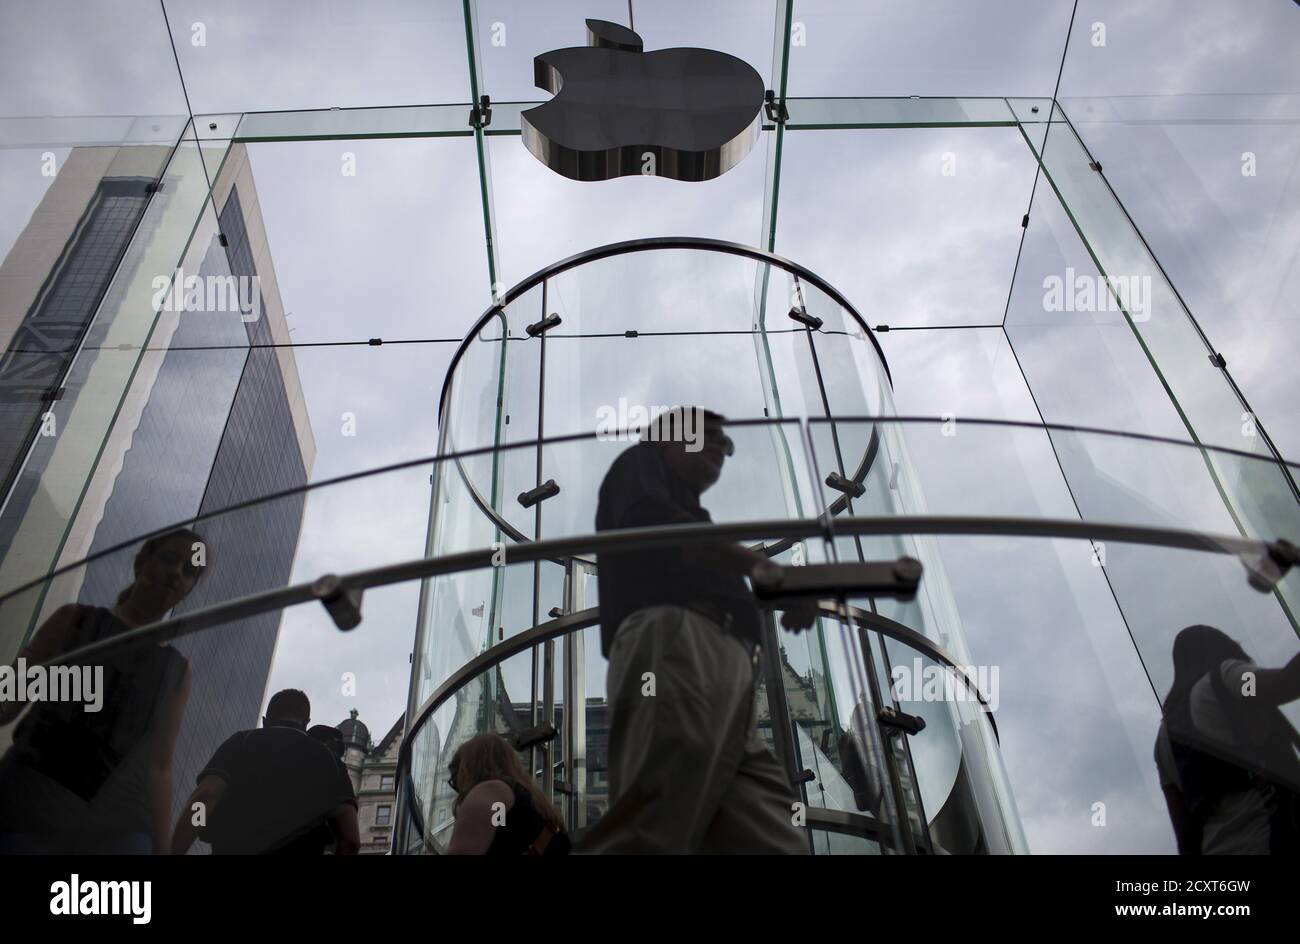 Customers enter the Apple store on 5th Avenue beneath an Apple logo in the Manhattan borough of New York City, July 21, 2015. Apple Inc said it is experiencing some issues with its App Store, Apple Music, iTunes Store and some other services. The company did not provide details but said only some users were affected. Checks by Reuters on several Apple sites in Asia, Europe and North and South America all showed issues with the services. REUTERS/Mike Segar Stock Photo